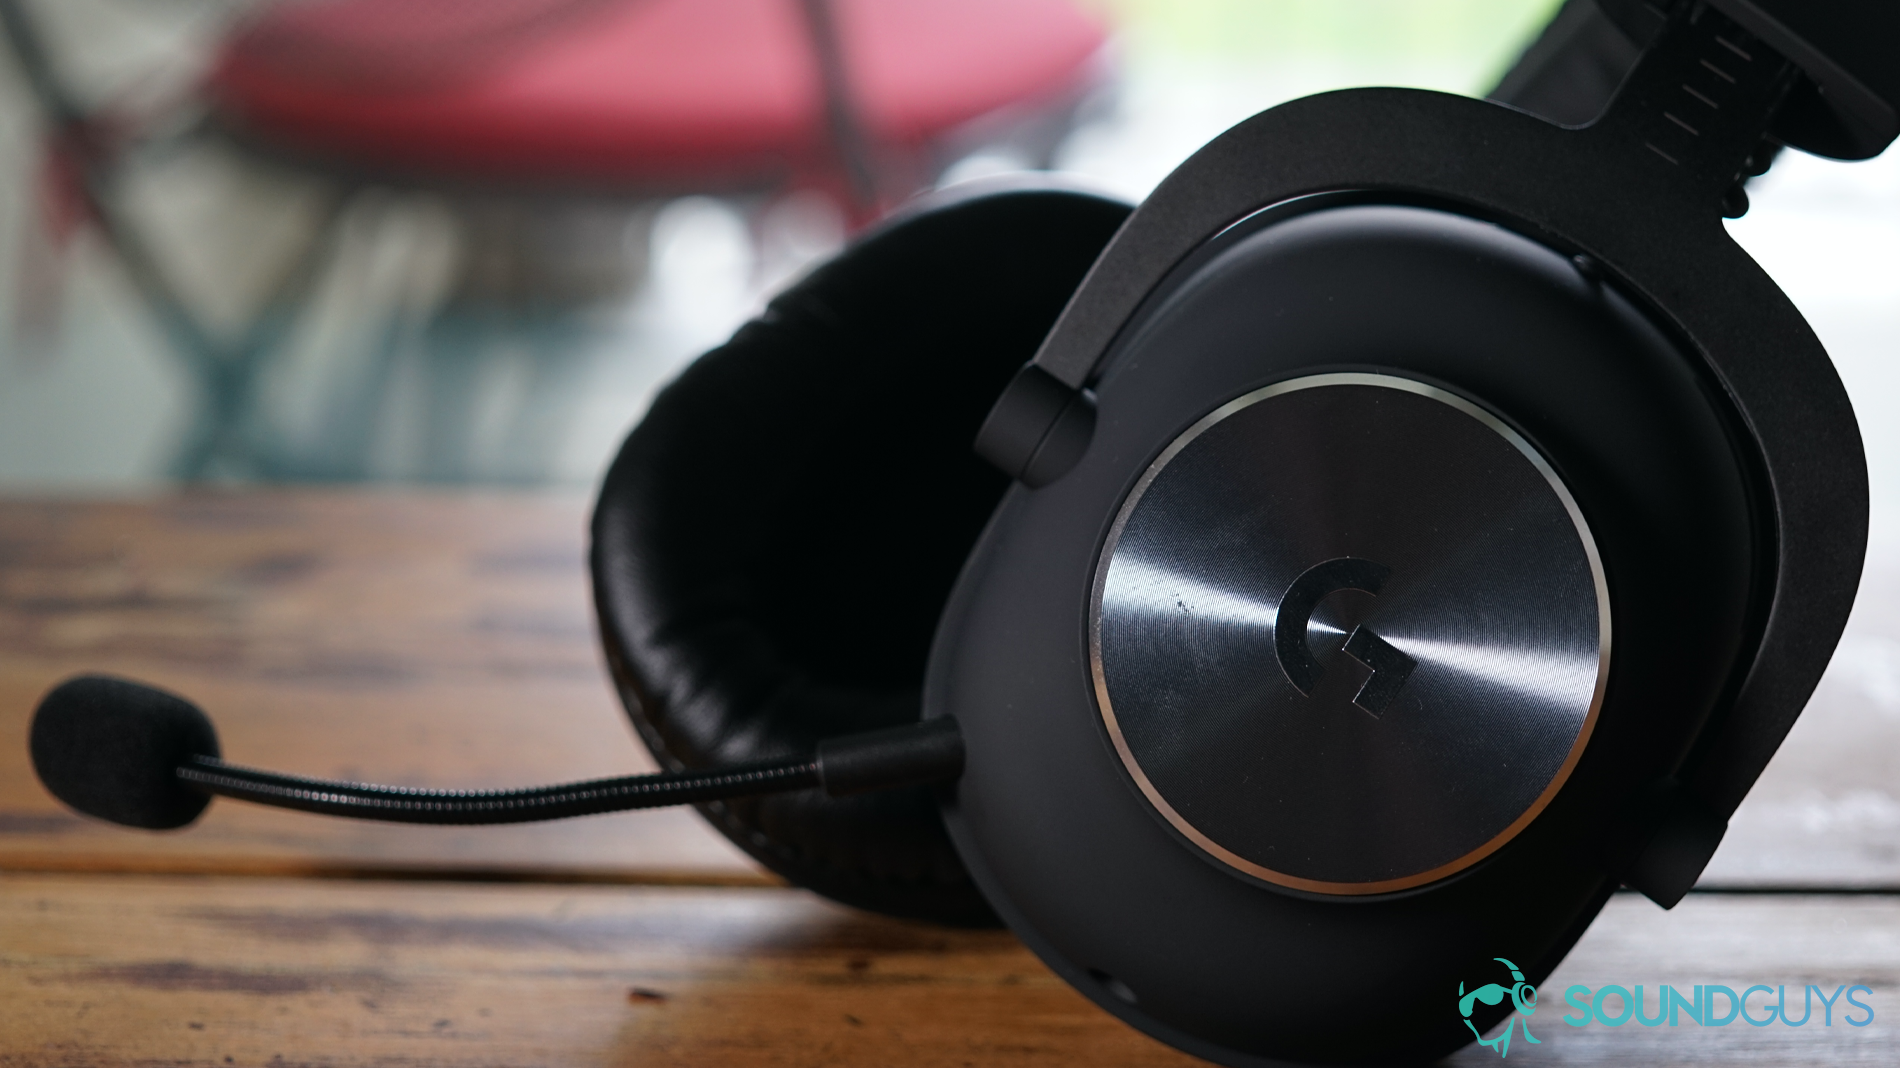 A picture of the Logitech G Pro X gaming headset in profile, sitting on a wooden surface.